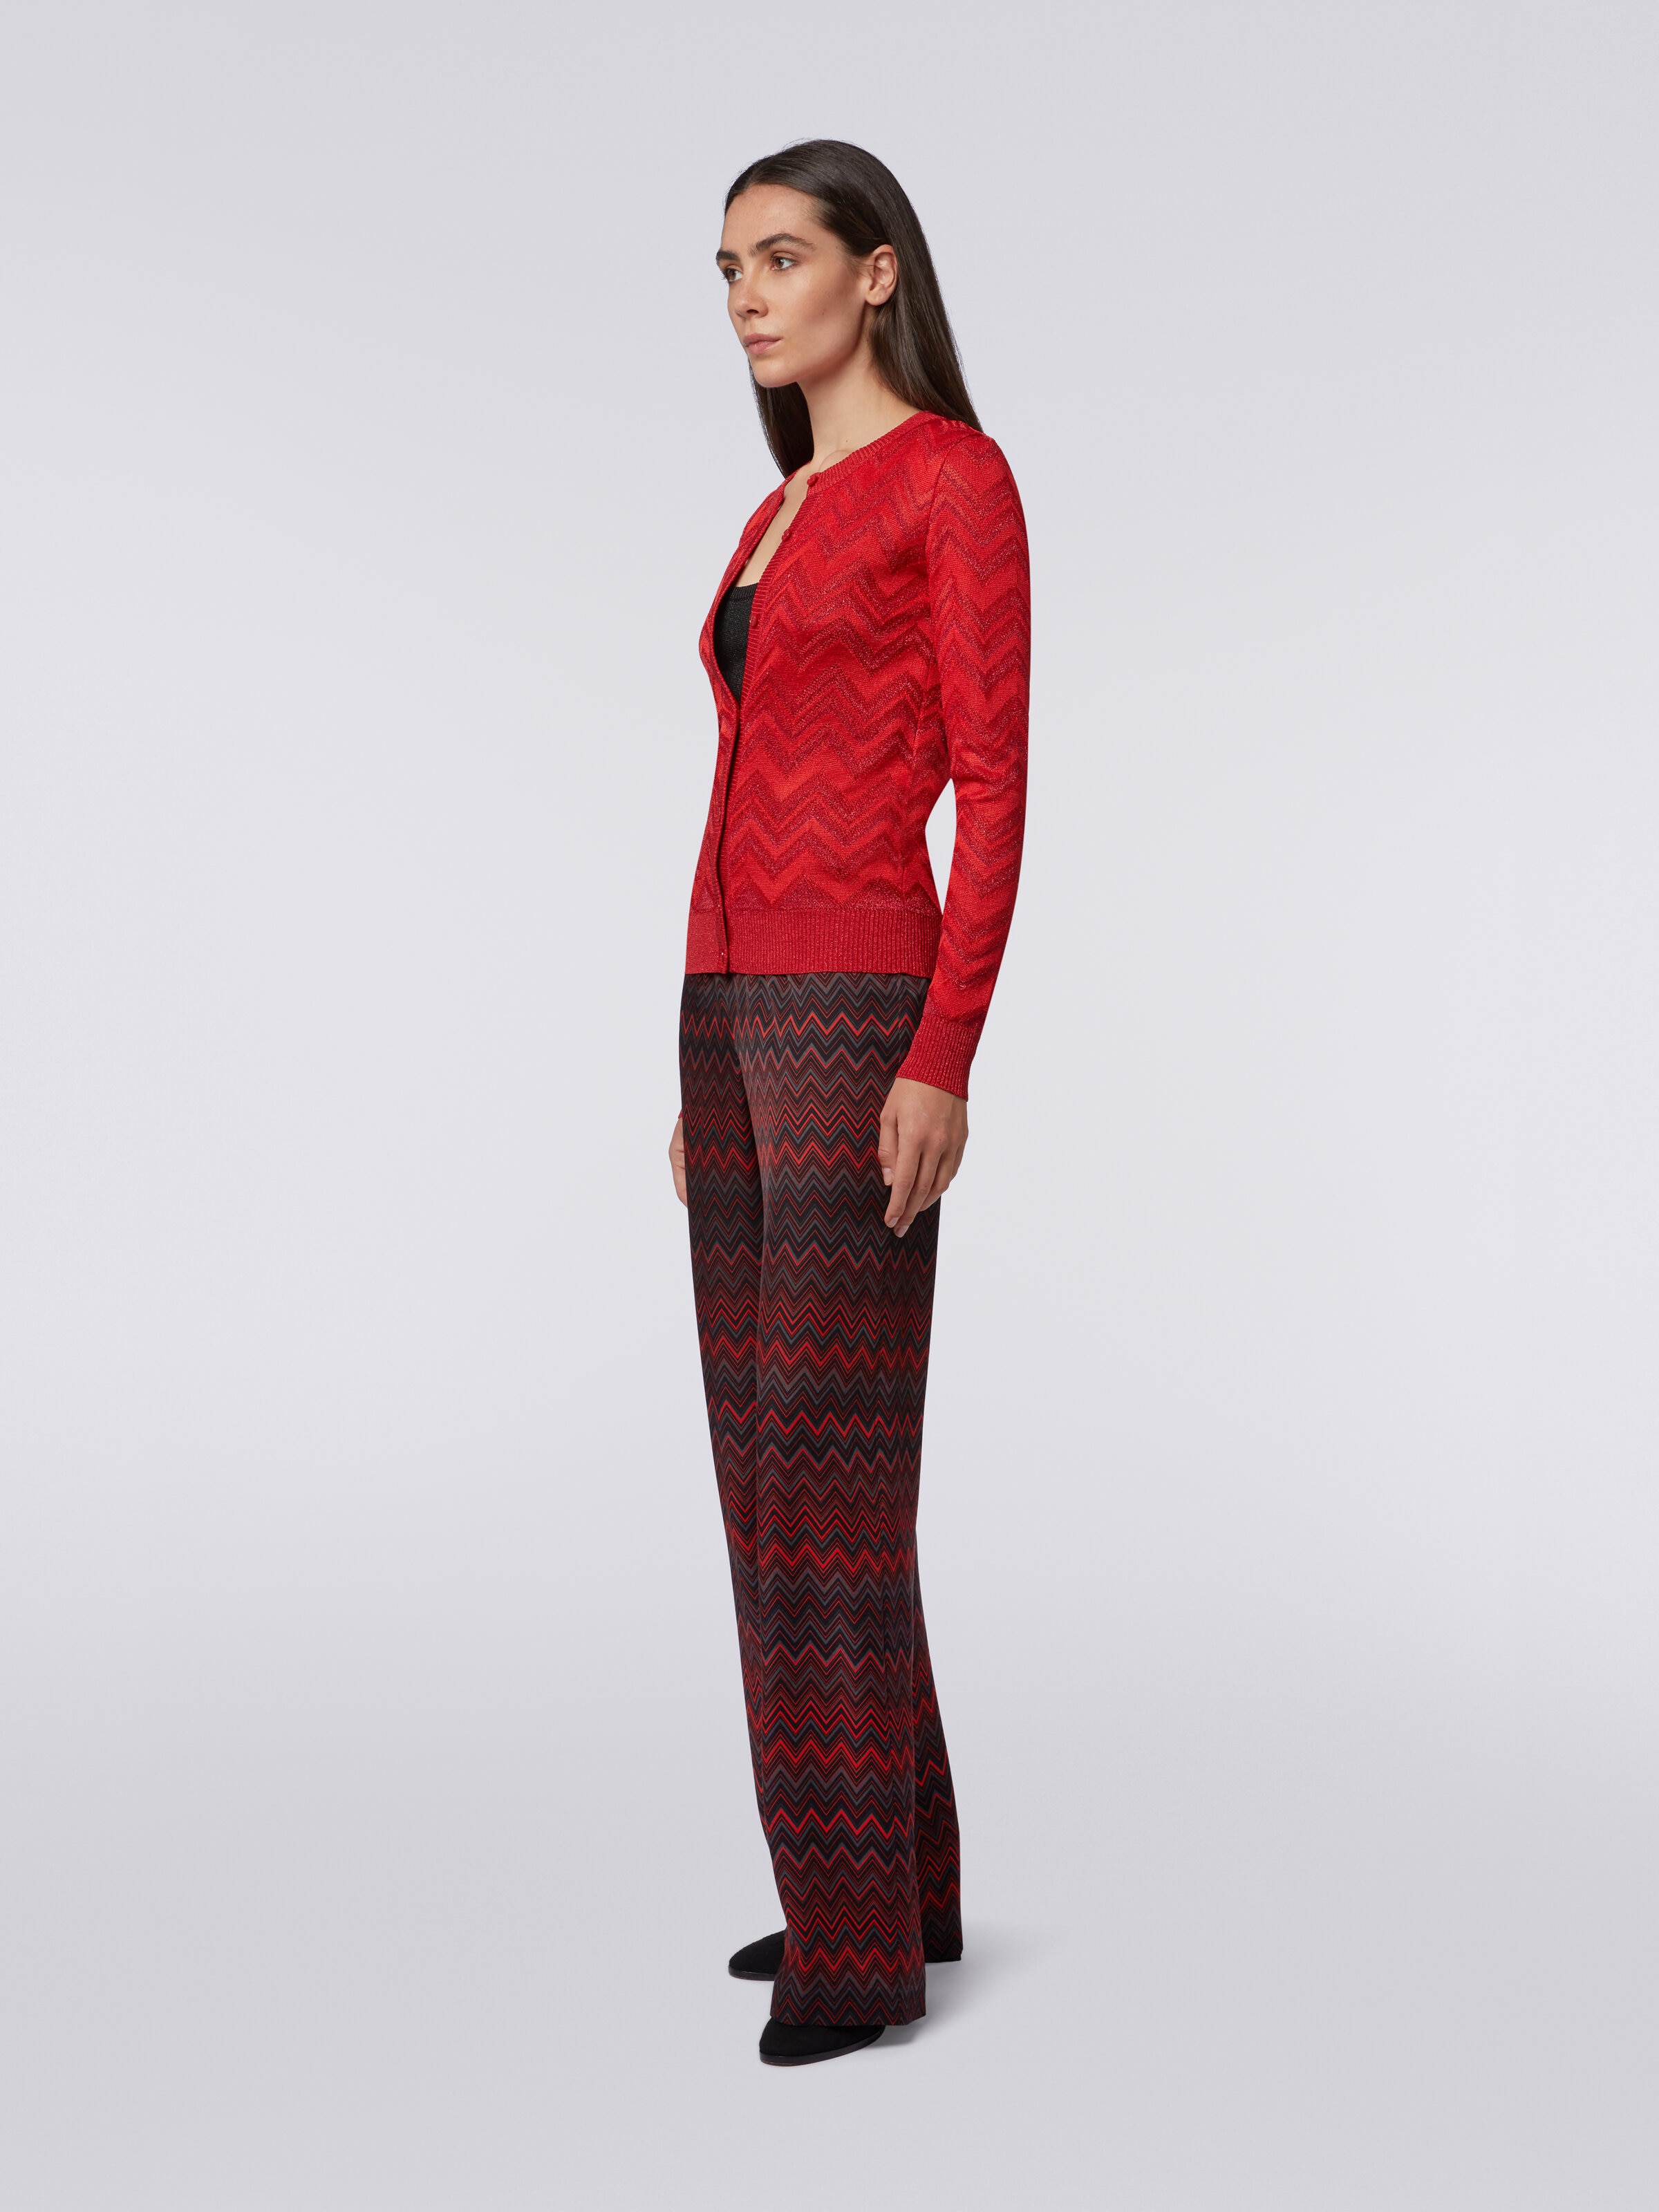 Cardigan in tonal zigzag knit with lurex, Red  - 2